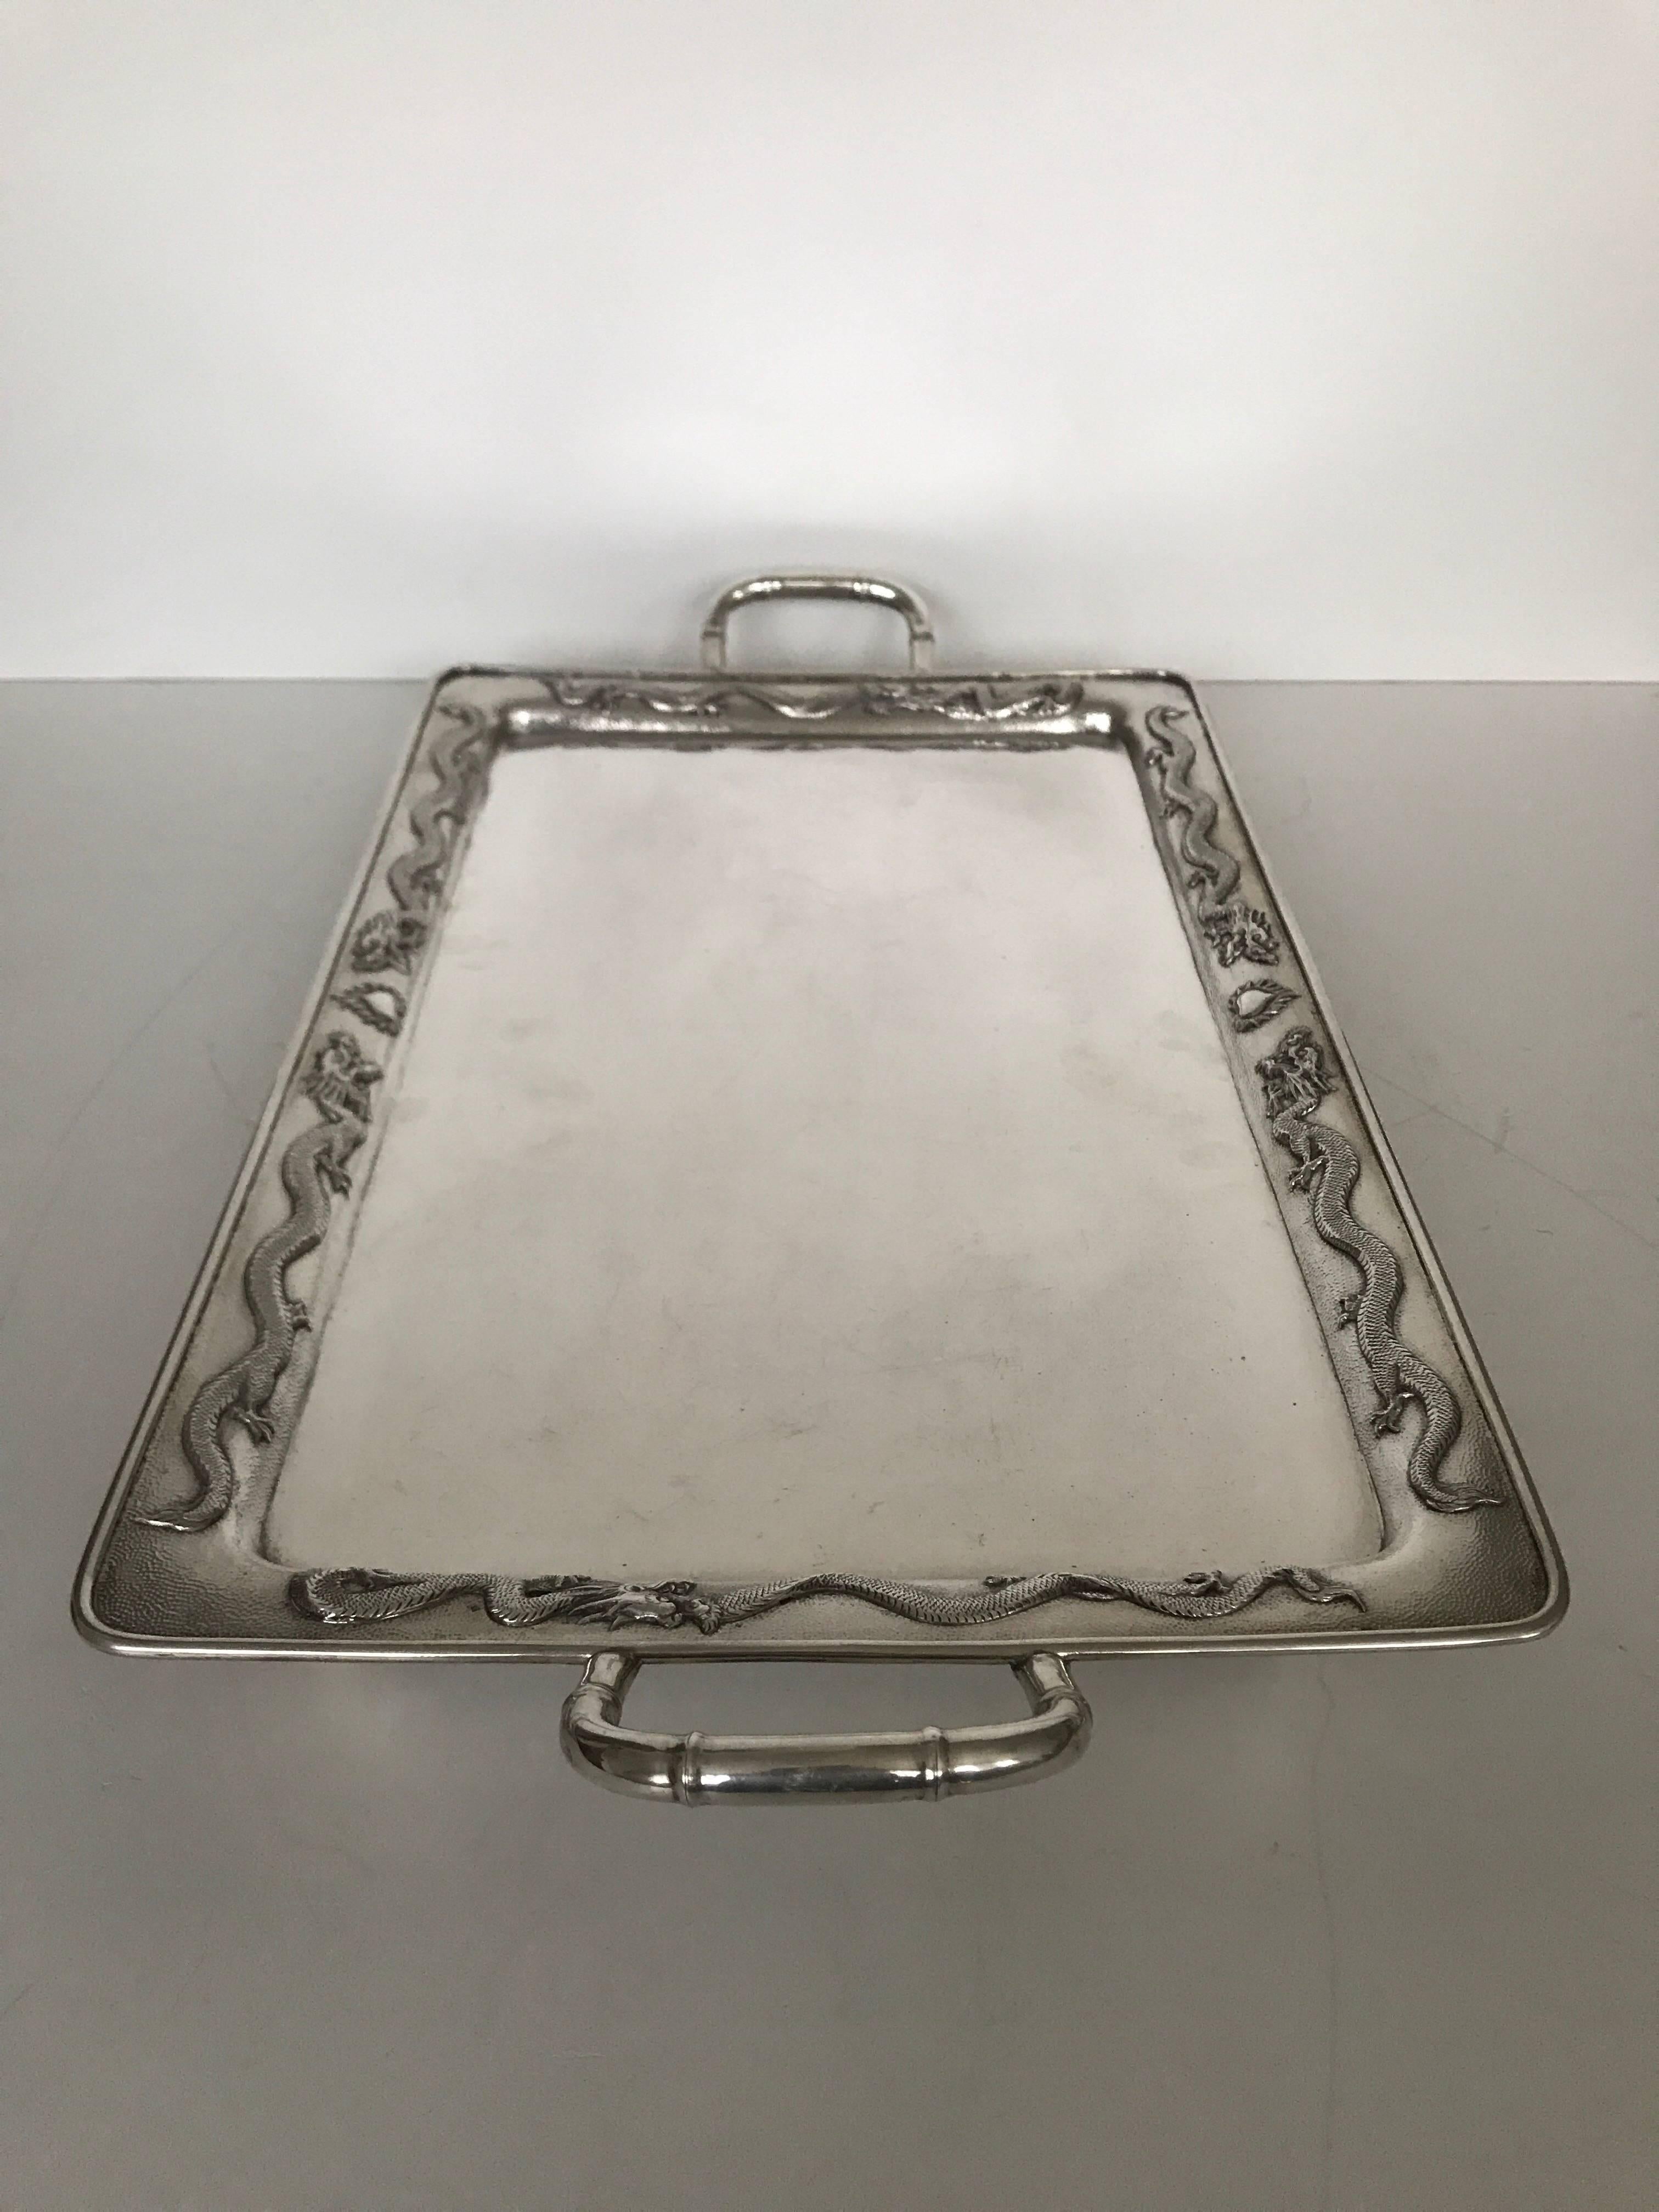 Massive Chinese Dragon Export Silver Tray Made by Luen Hing. A Fantastic Export silver tray with 6 dragons chasing the flaming pearl along the border of the tray. The handles are made like bamboo and the tray has four corner feet that it stand on.